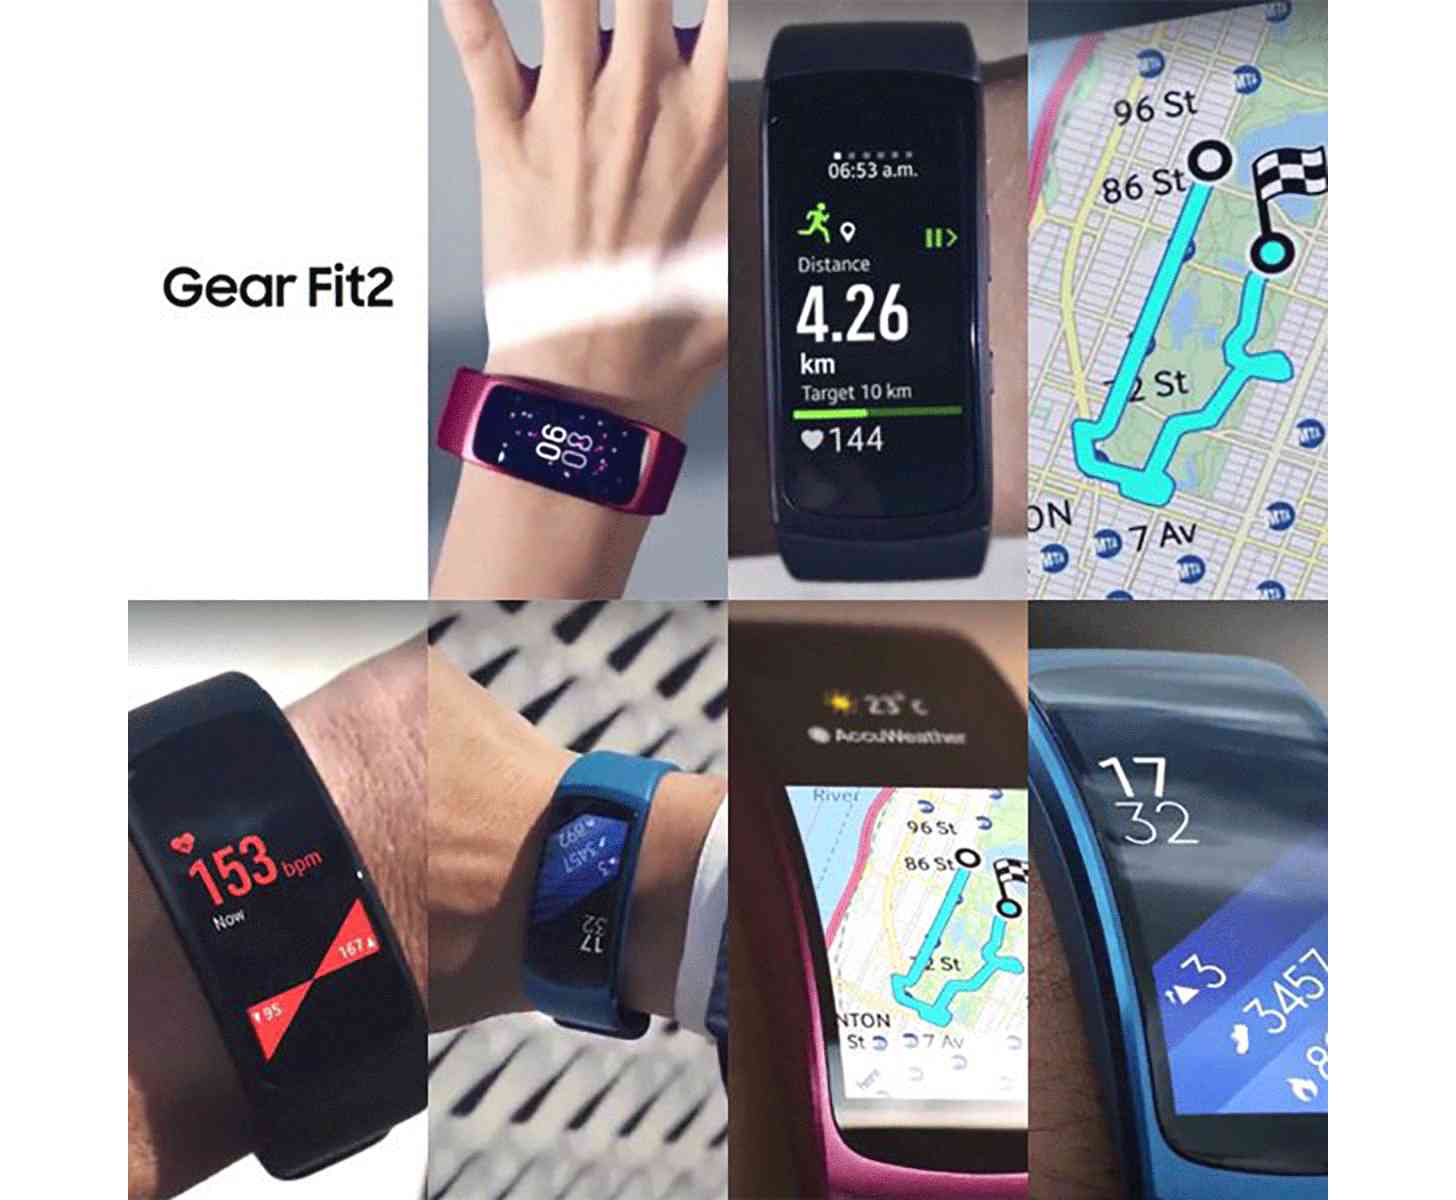 Samsung Gear Fit 2 leaked images